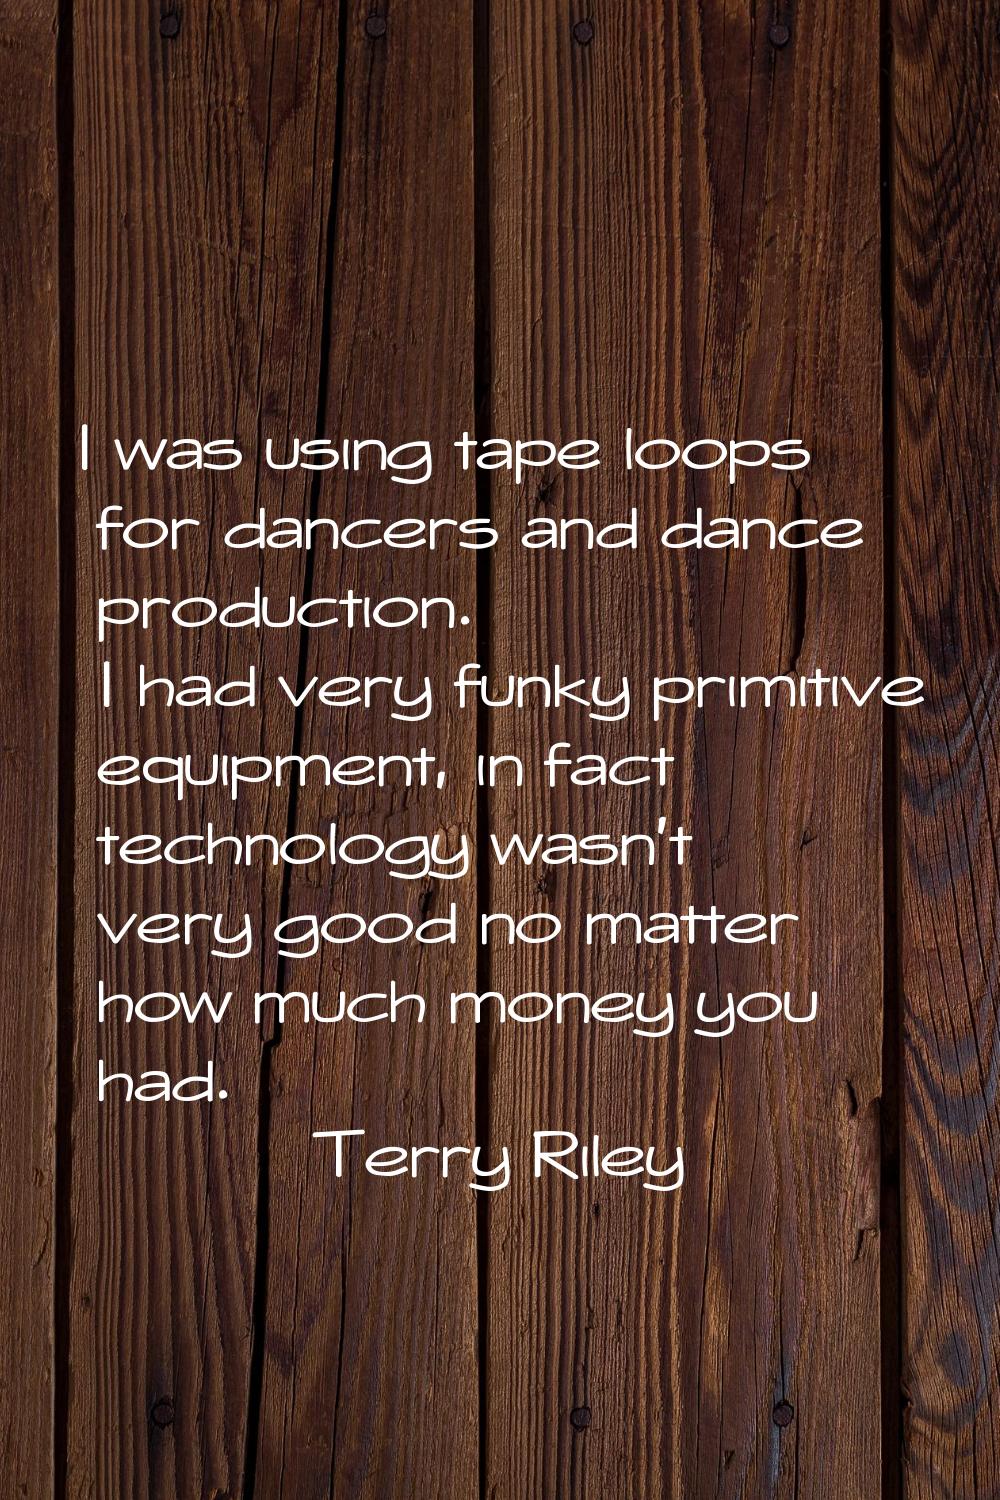 I was using tape loops for dancers and dance production. I had very funky primitive equipment, in f